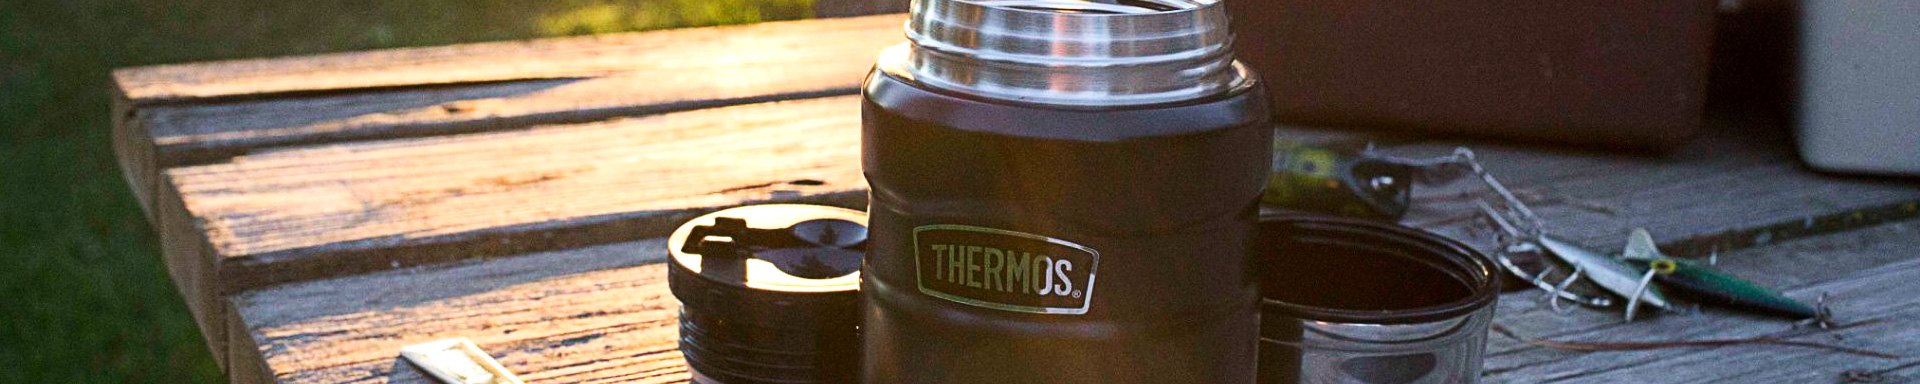 Thermos Coolers